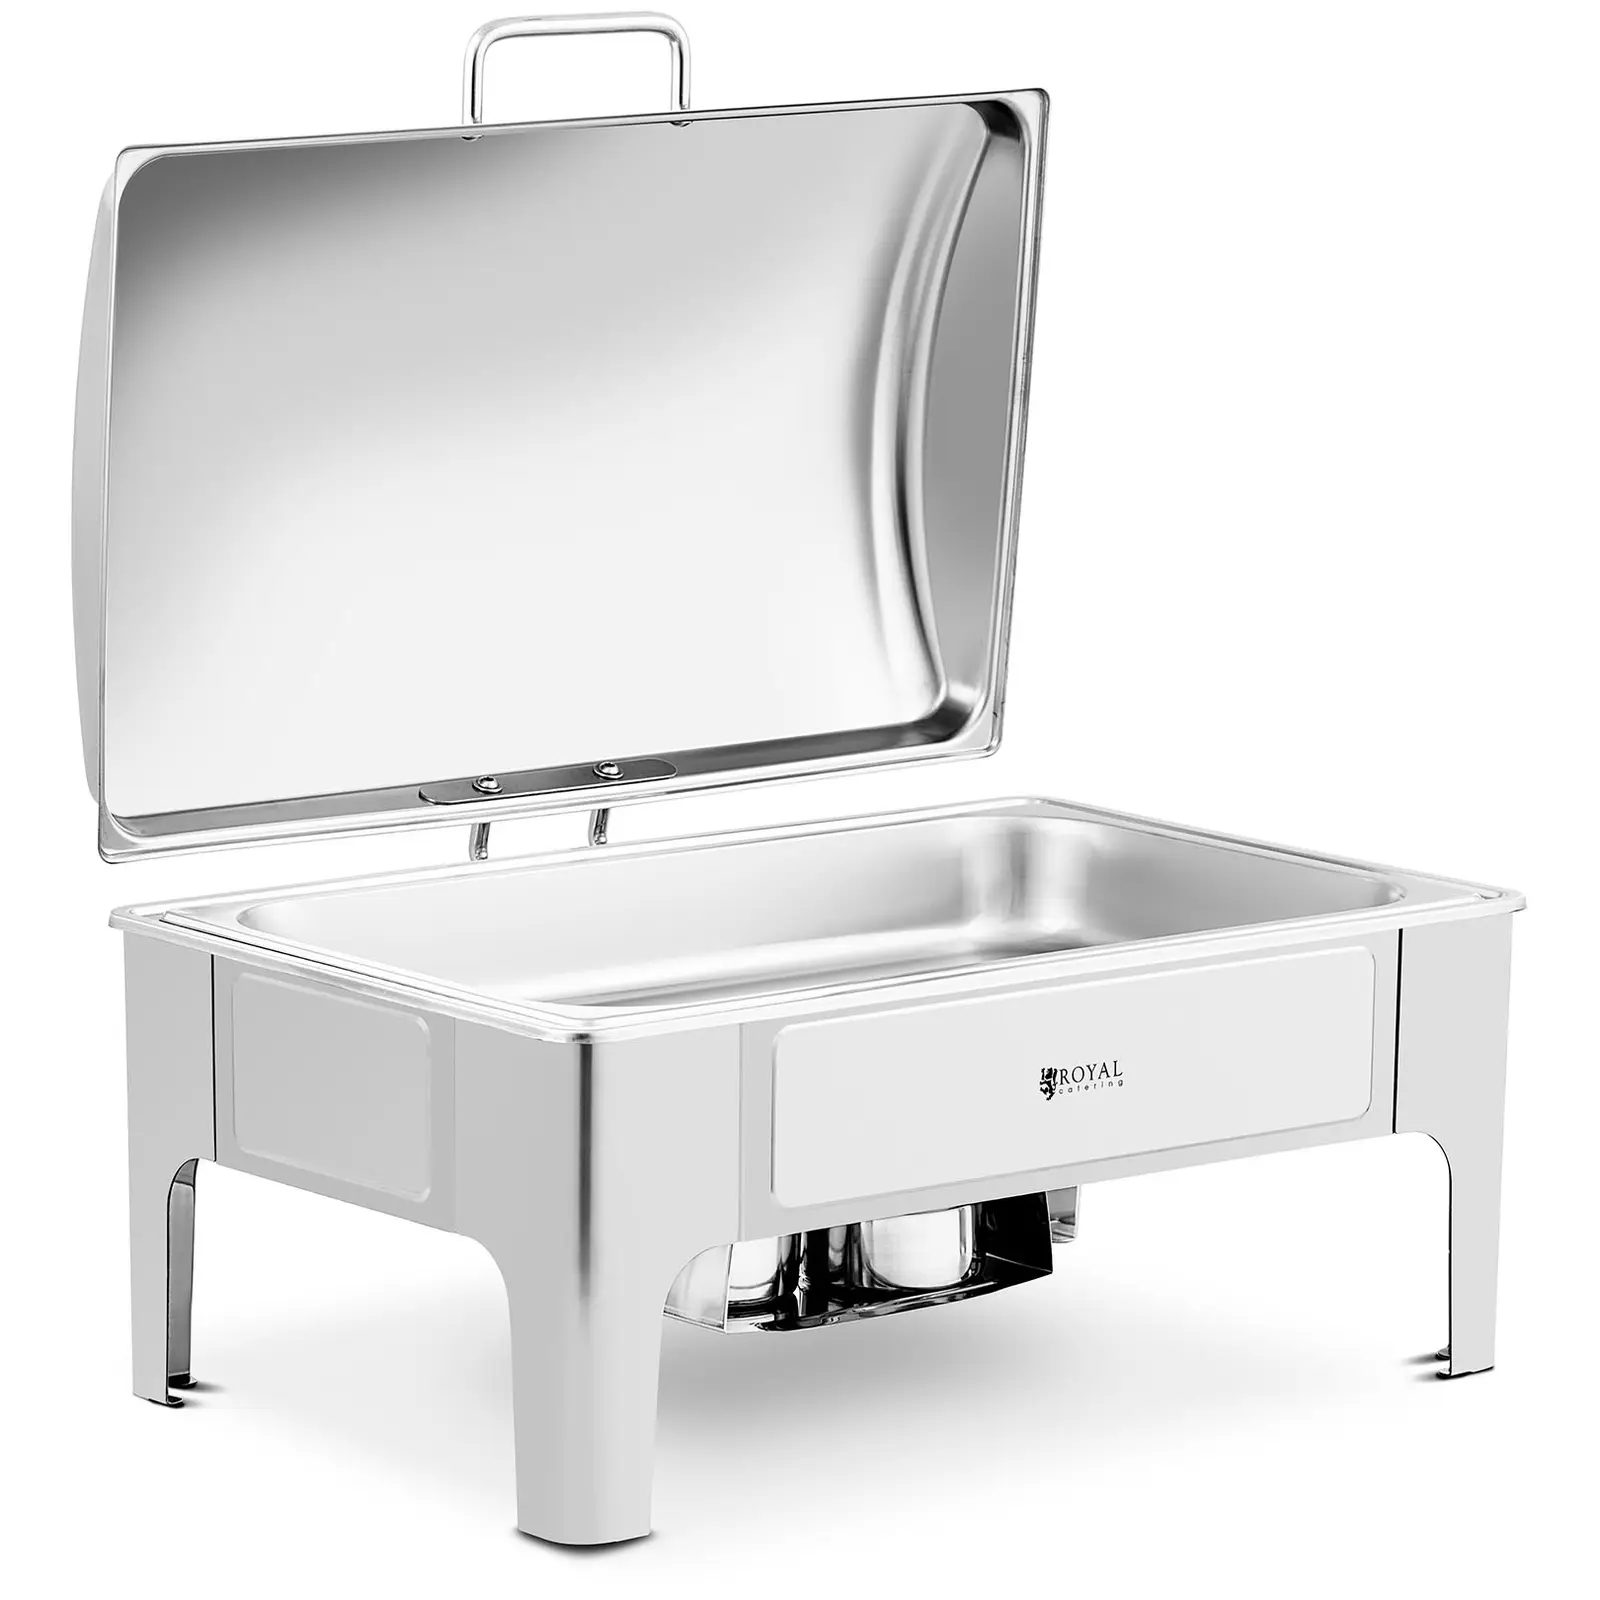 Chafing dish - GN 1/1 - Royal Catering - 8,5 l - 2 bruleurs - Forme arrondie